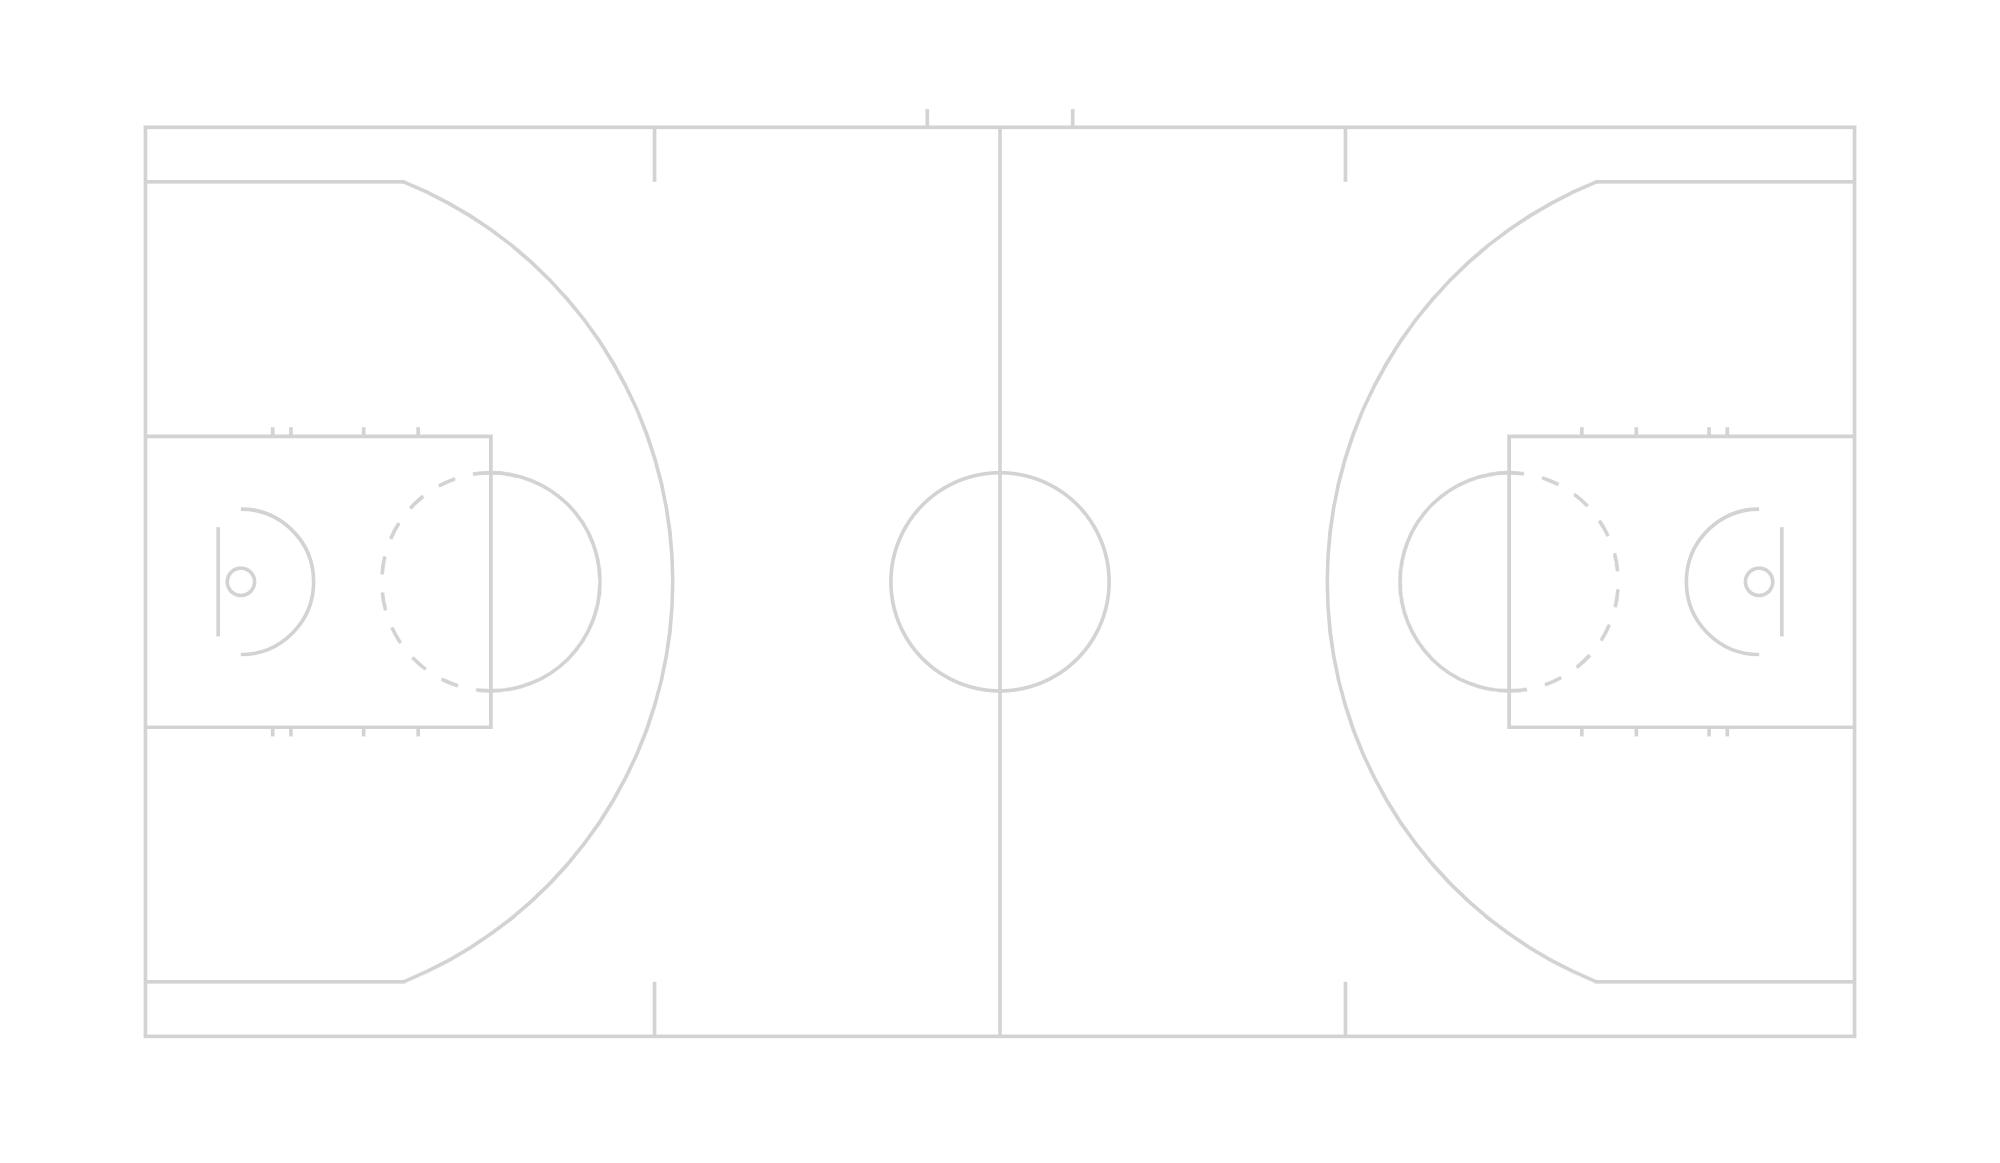 Official Nba Basketball Court Dimensions